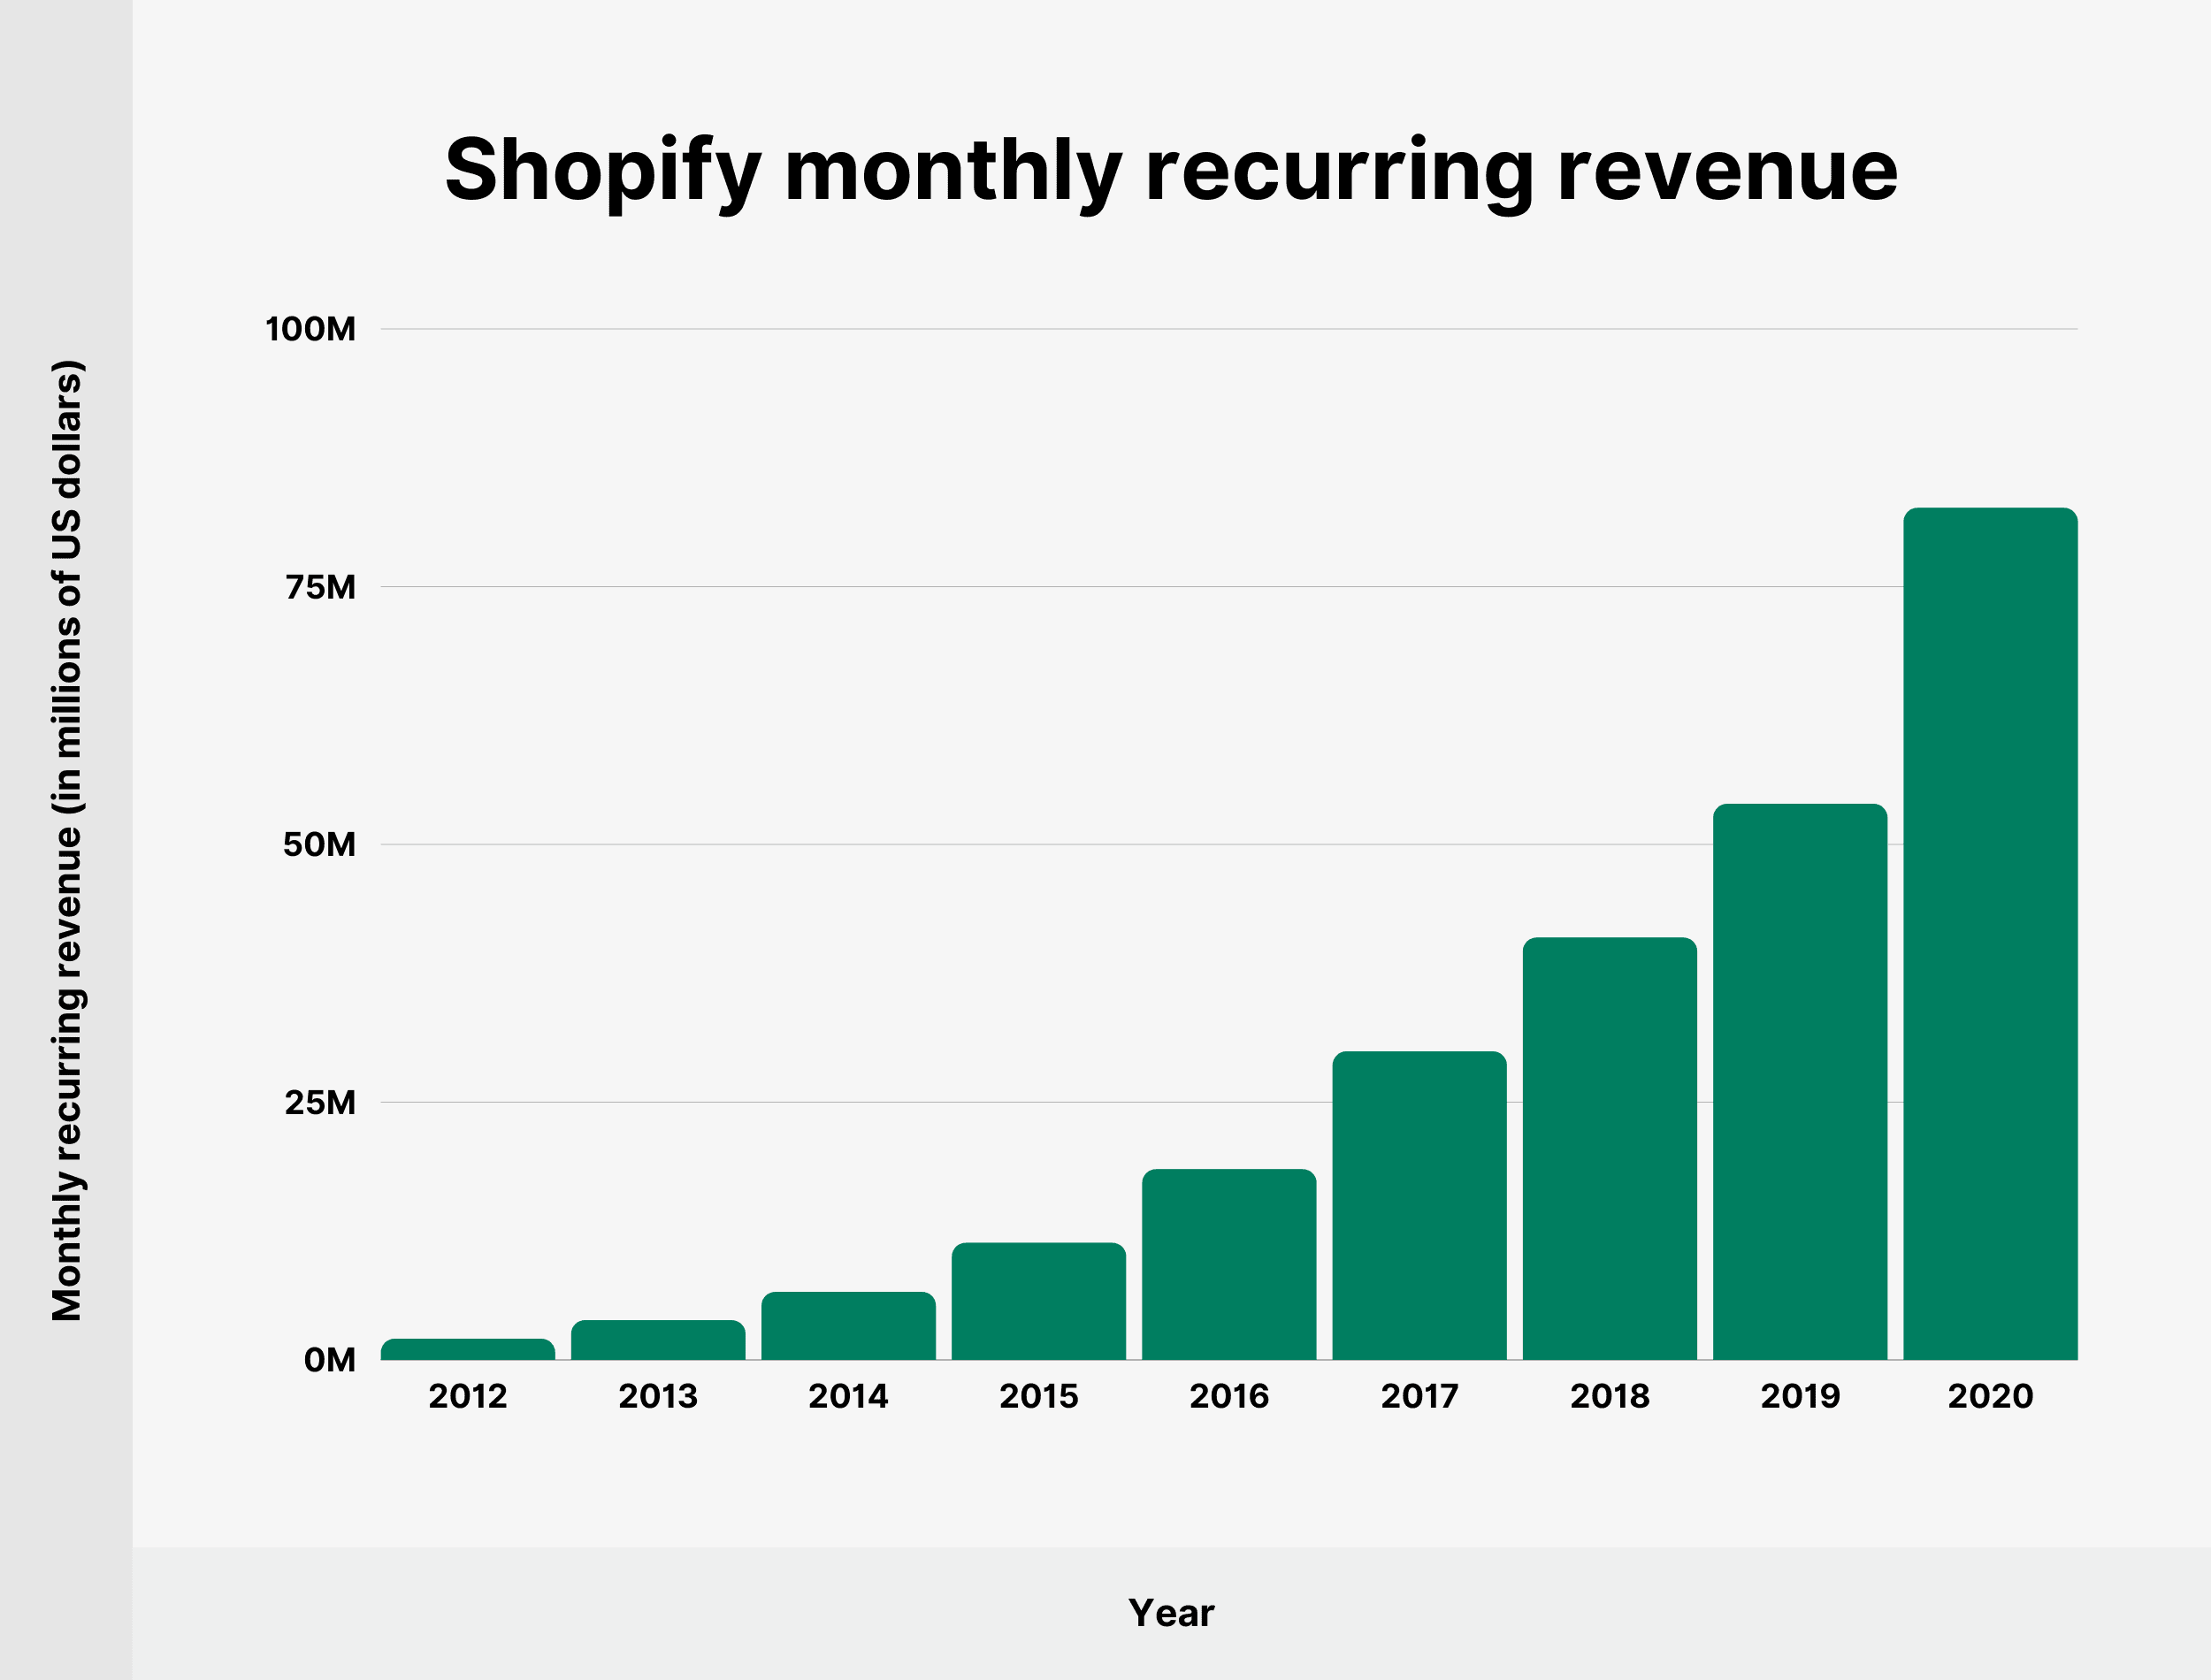 Shopify monthly recurring revenue